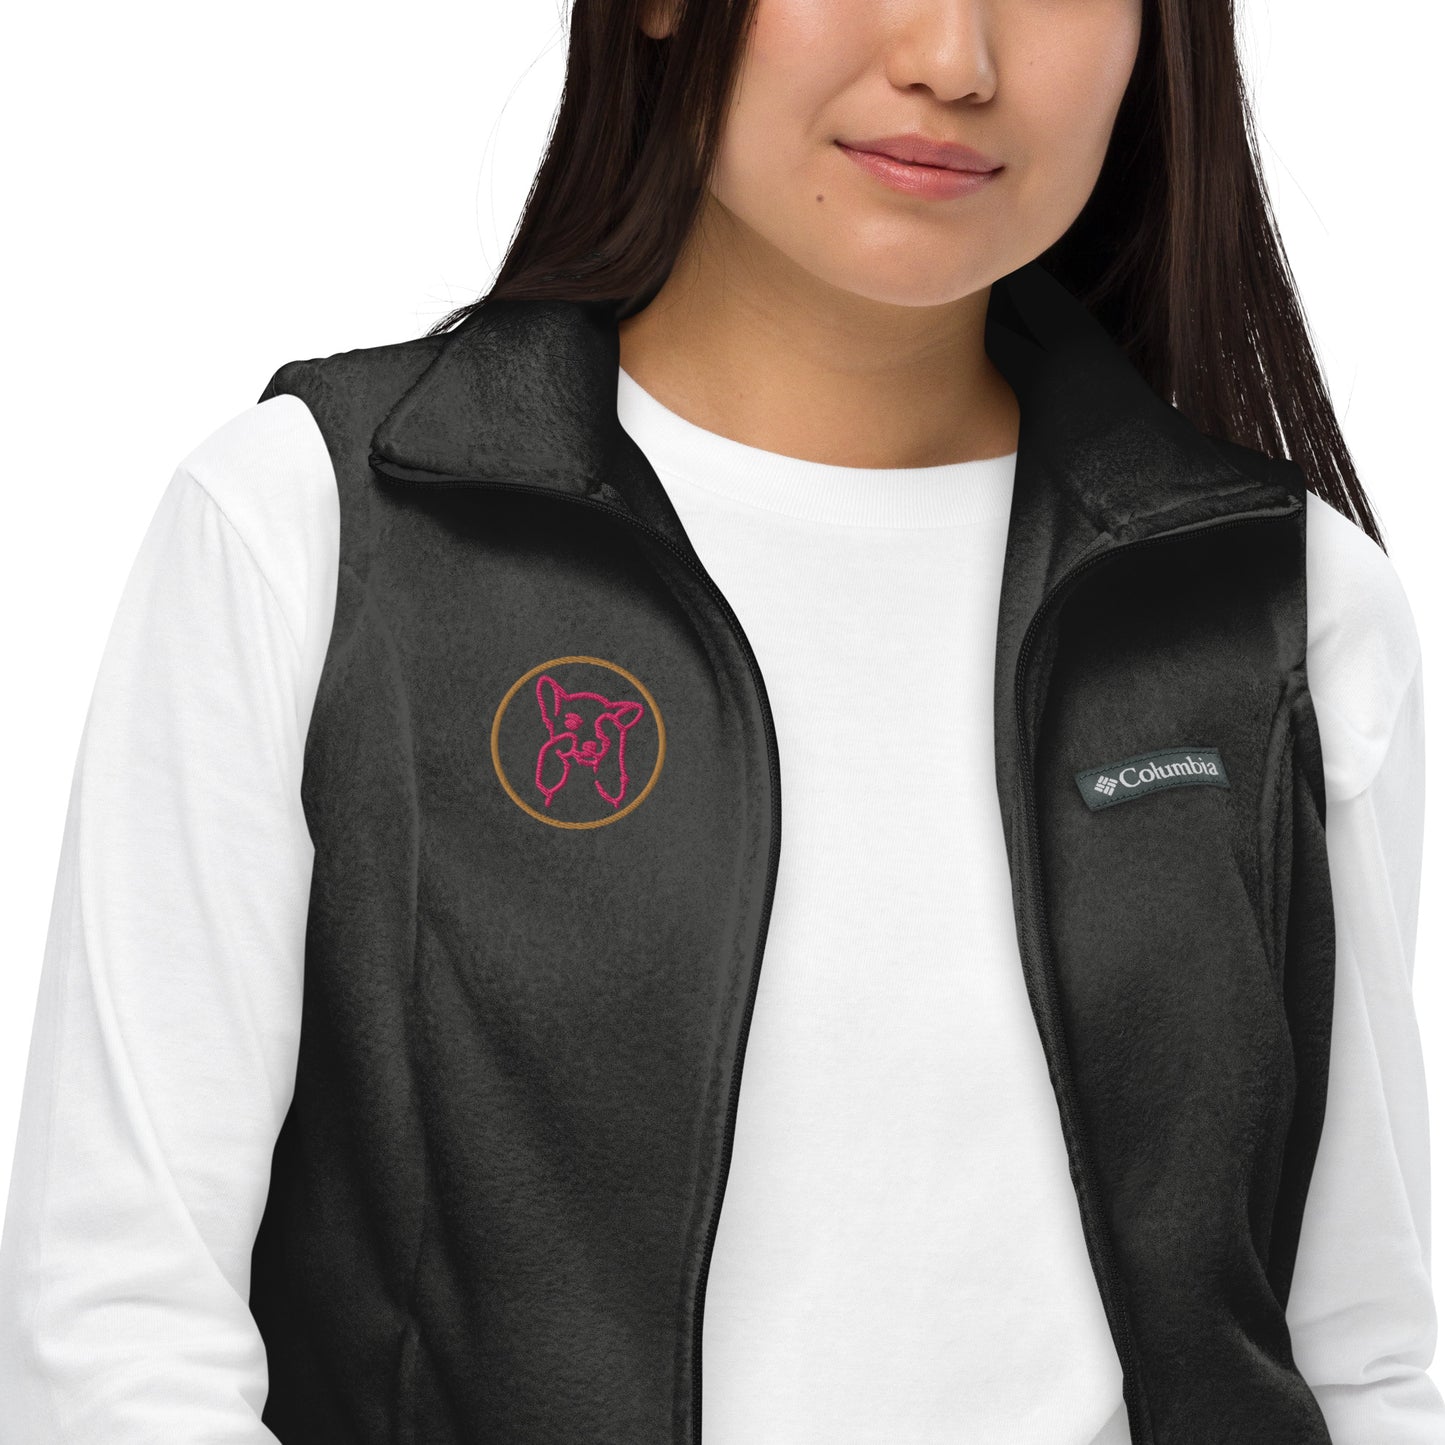 Women’s Columbia fleece vest , flat embroidery, flamingo color cute dog sketch in a circle